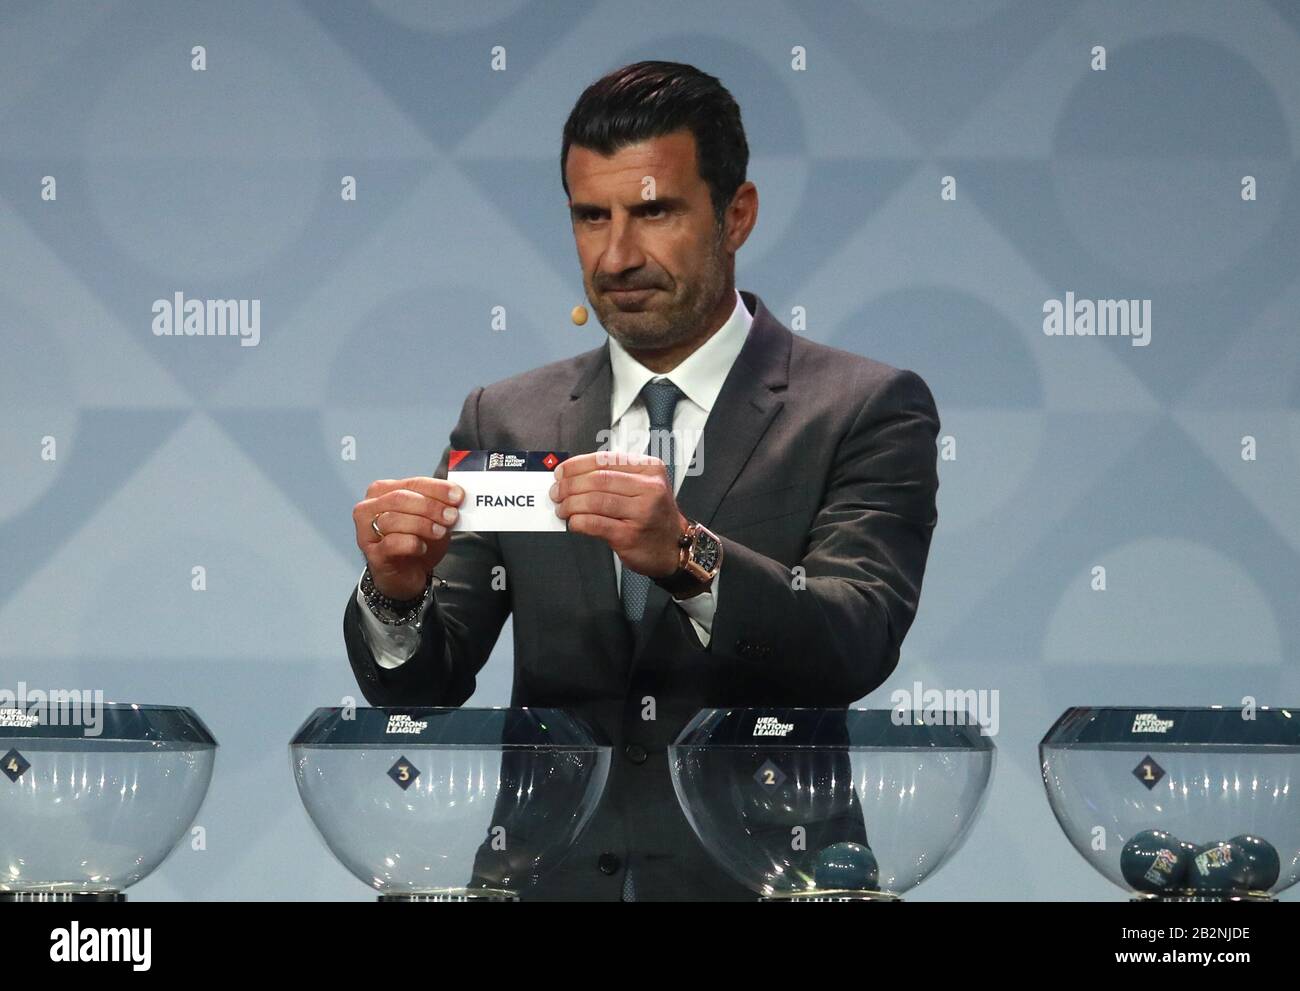 Luis Figo draws France during the UEFA Nations League 2020/21 draw at the  Beurs van Berlage Conference Centre, Amsterdam Stock Photo - Alamy